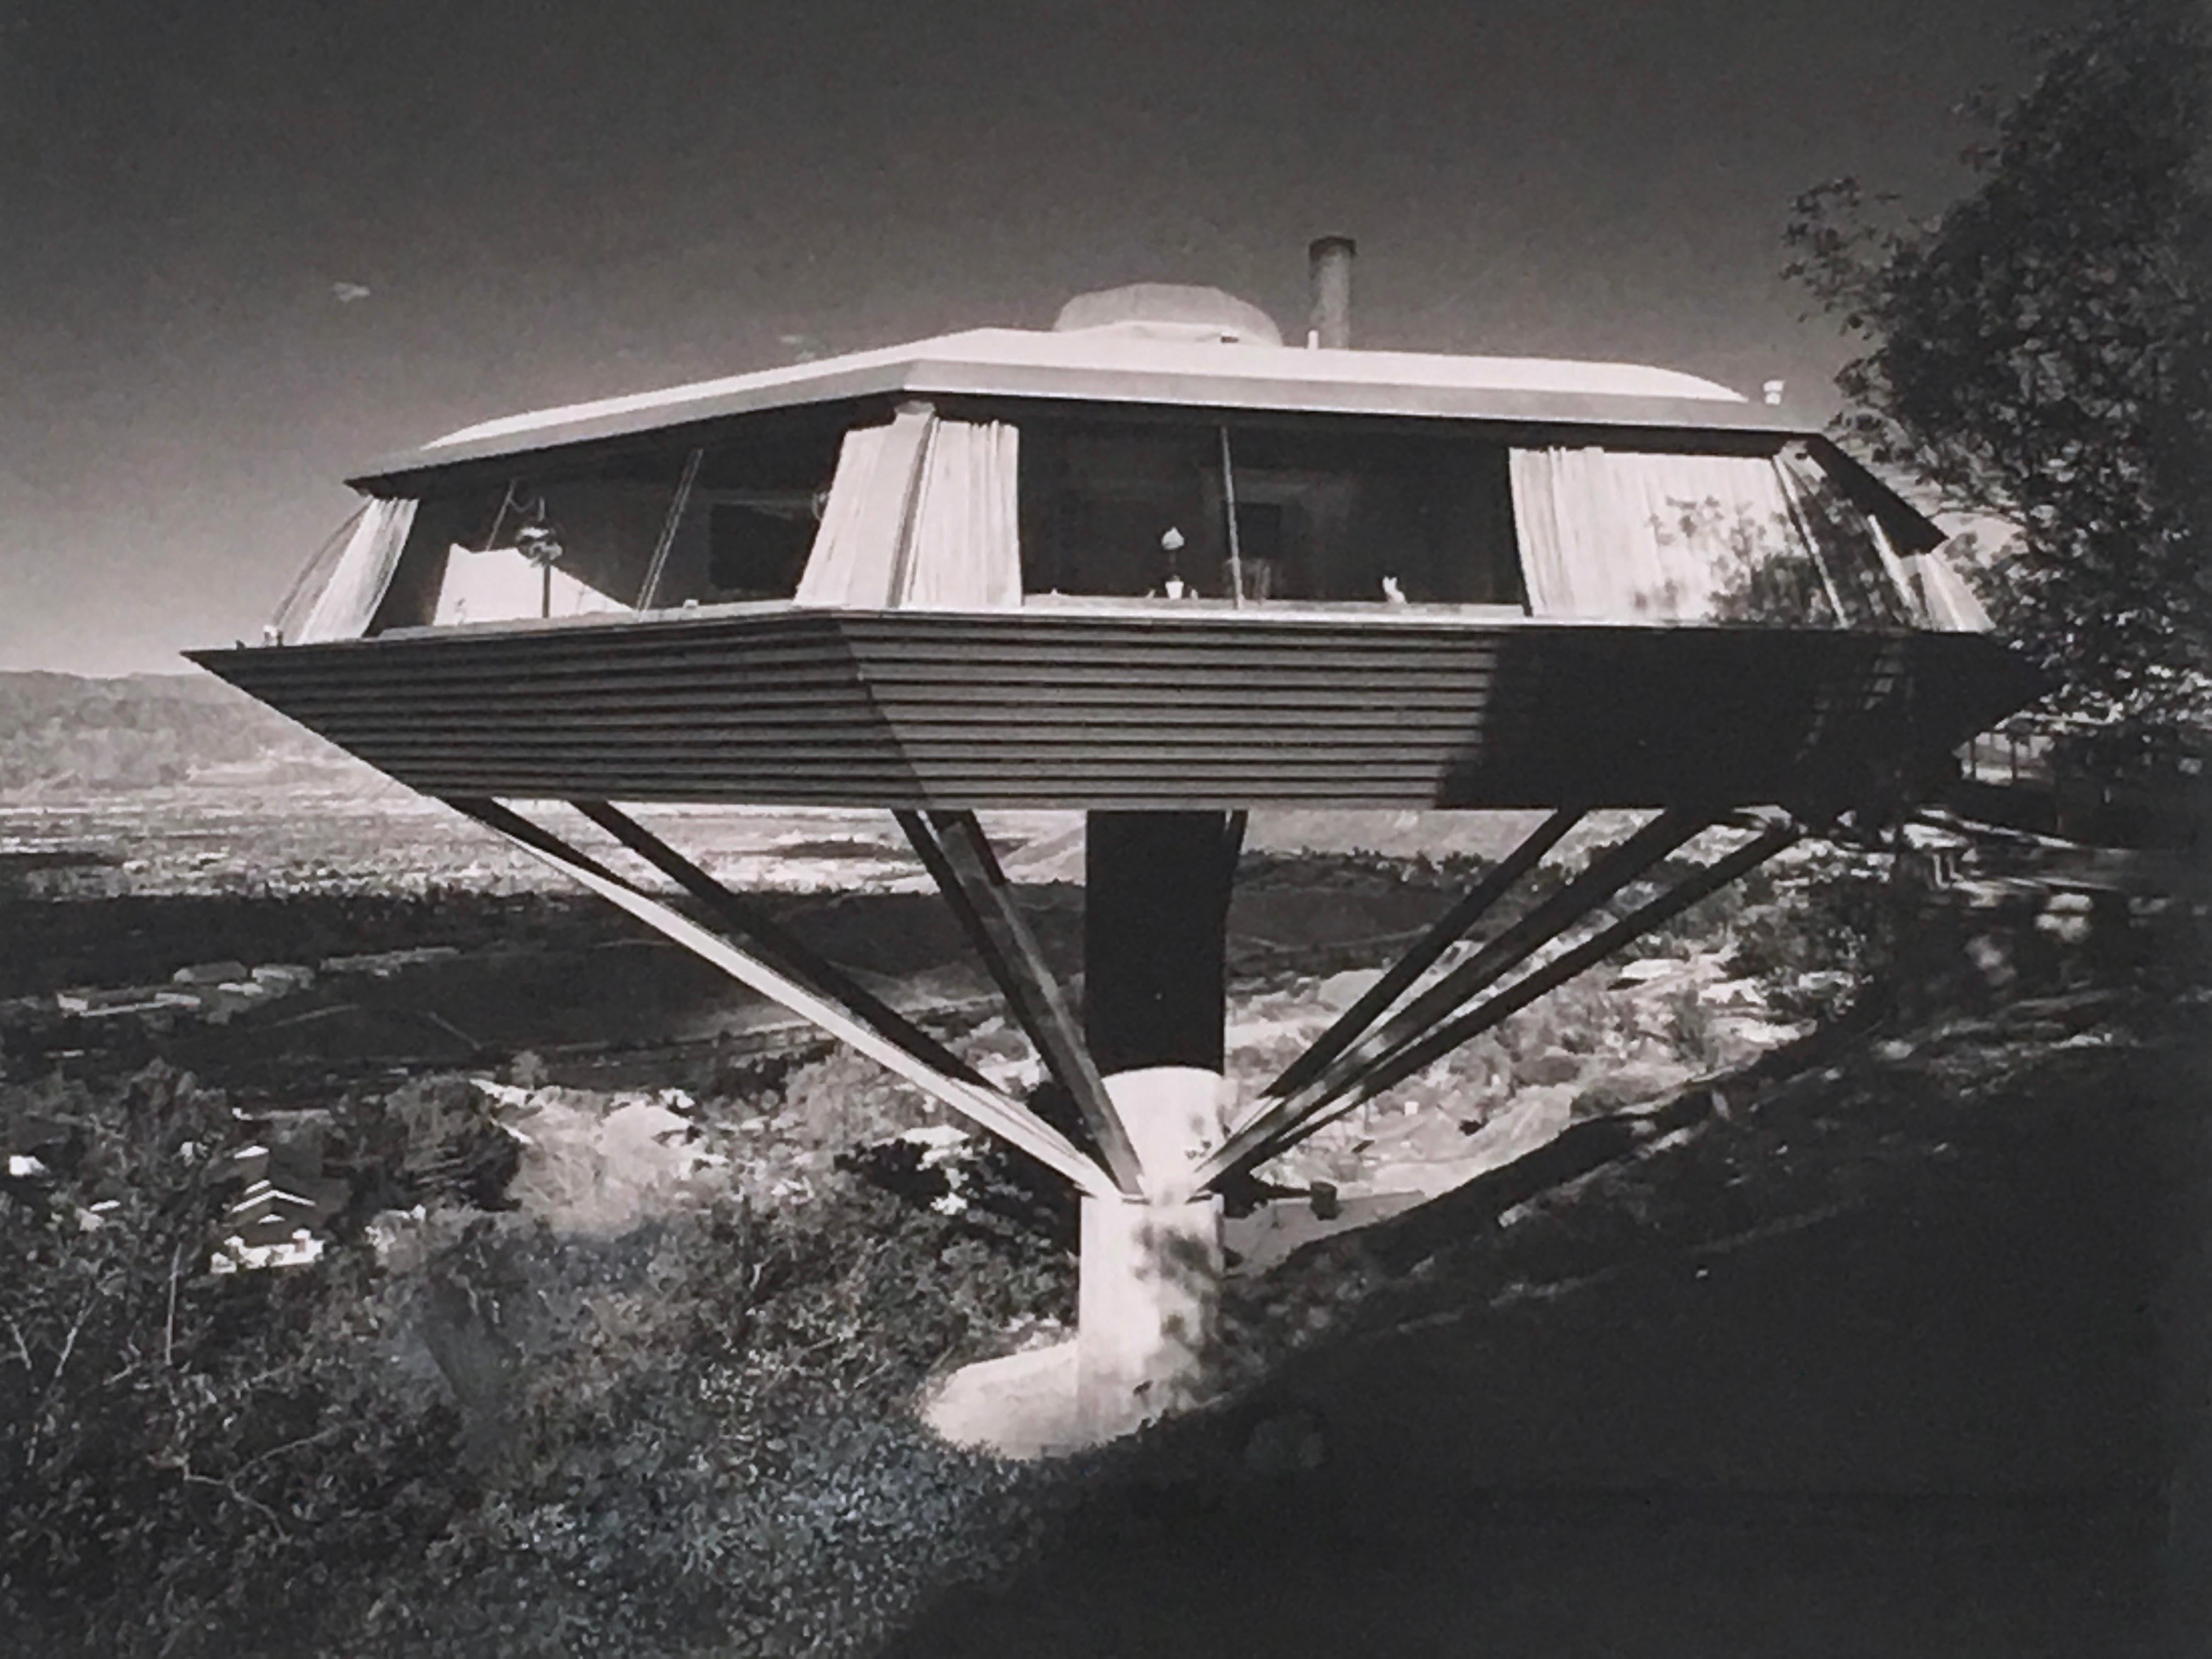 An original  black and white photograph by important American architectural photographer Julius Shulman (1910-2009) of the Chemosphere in Los Angeles, one of the world's most famous Mid-Century Modern houses designed by architect John Lautner,